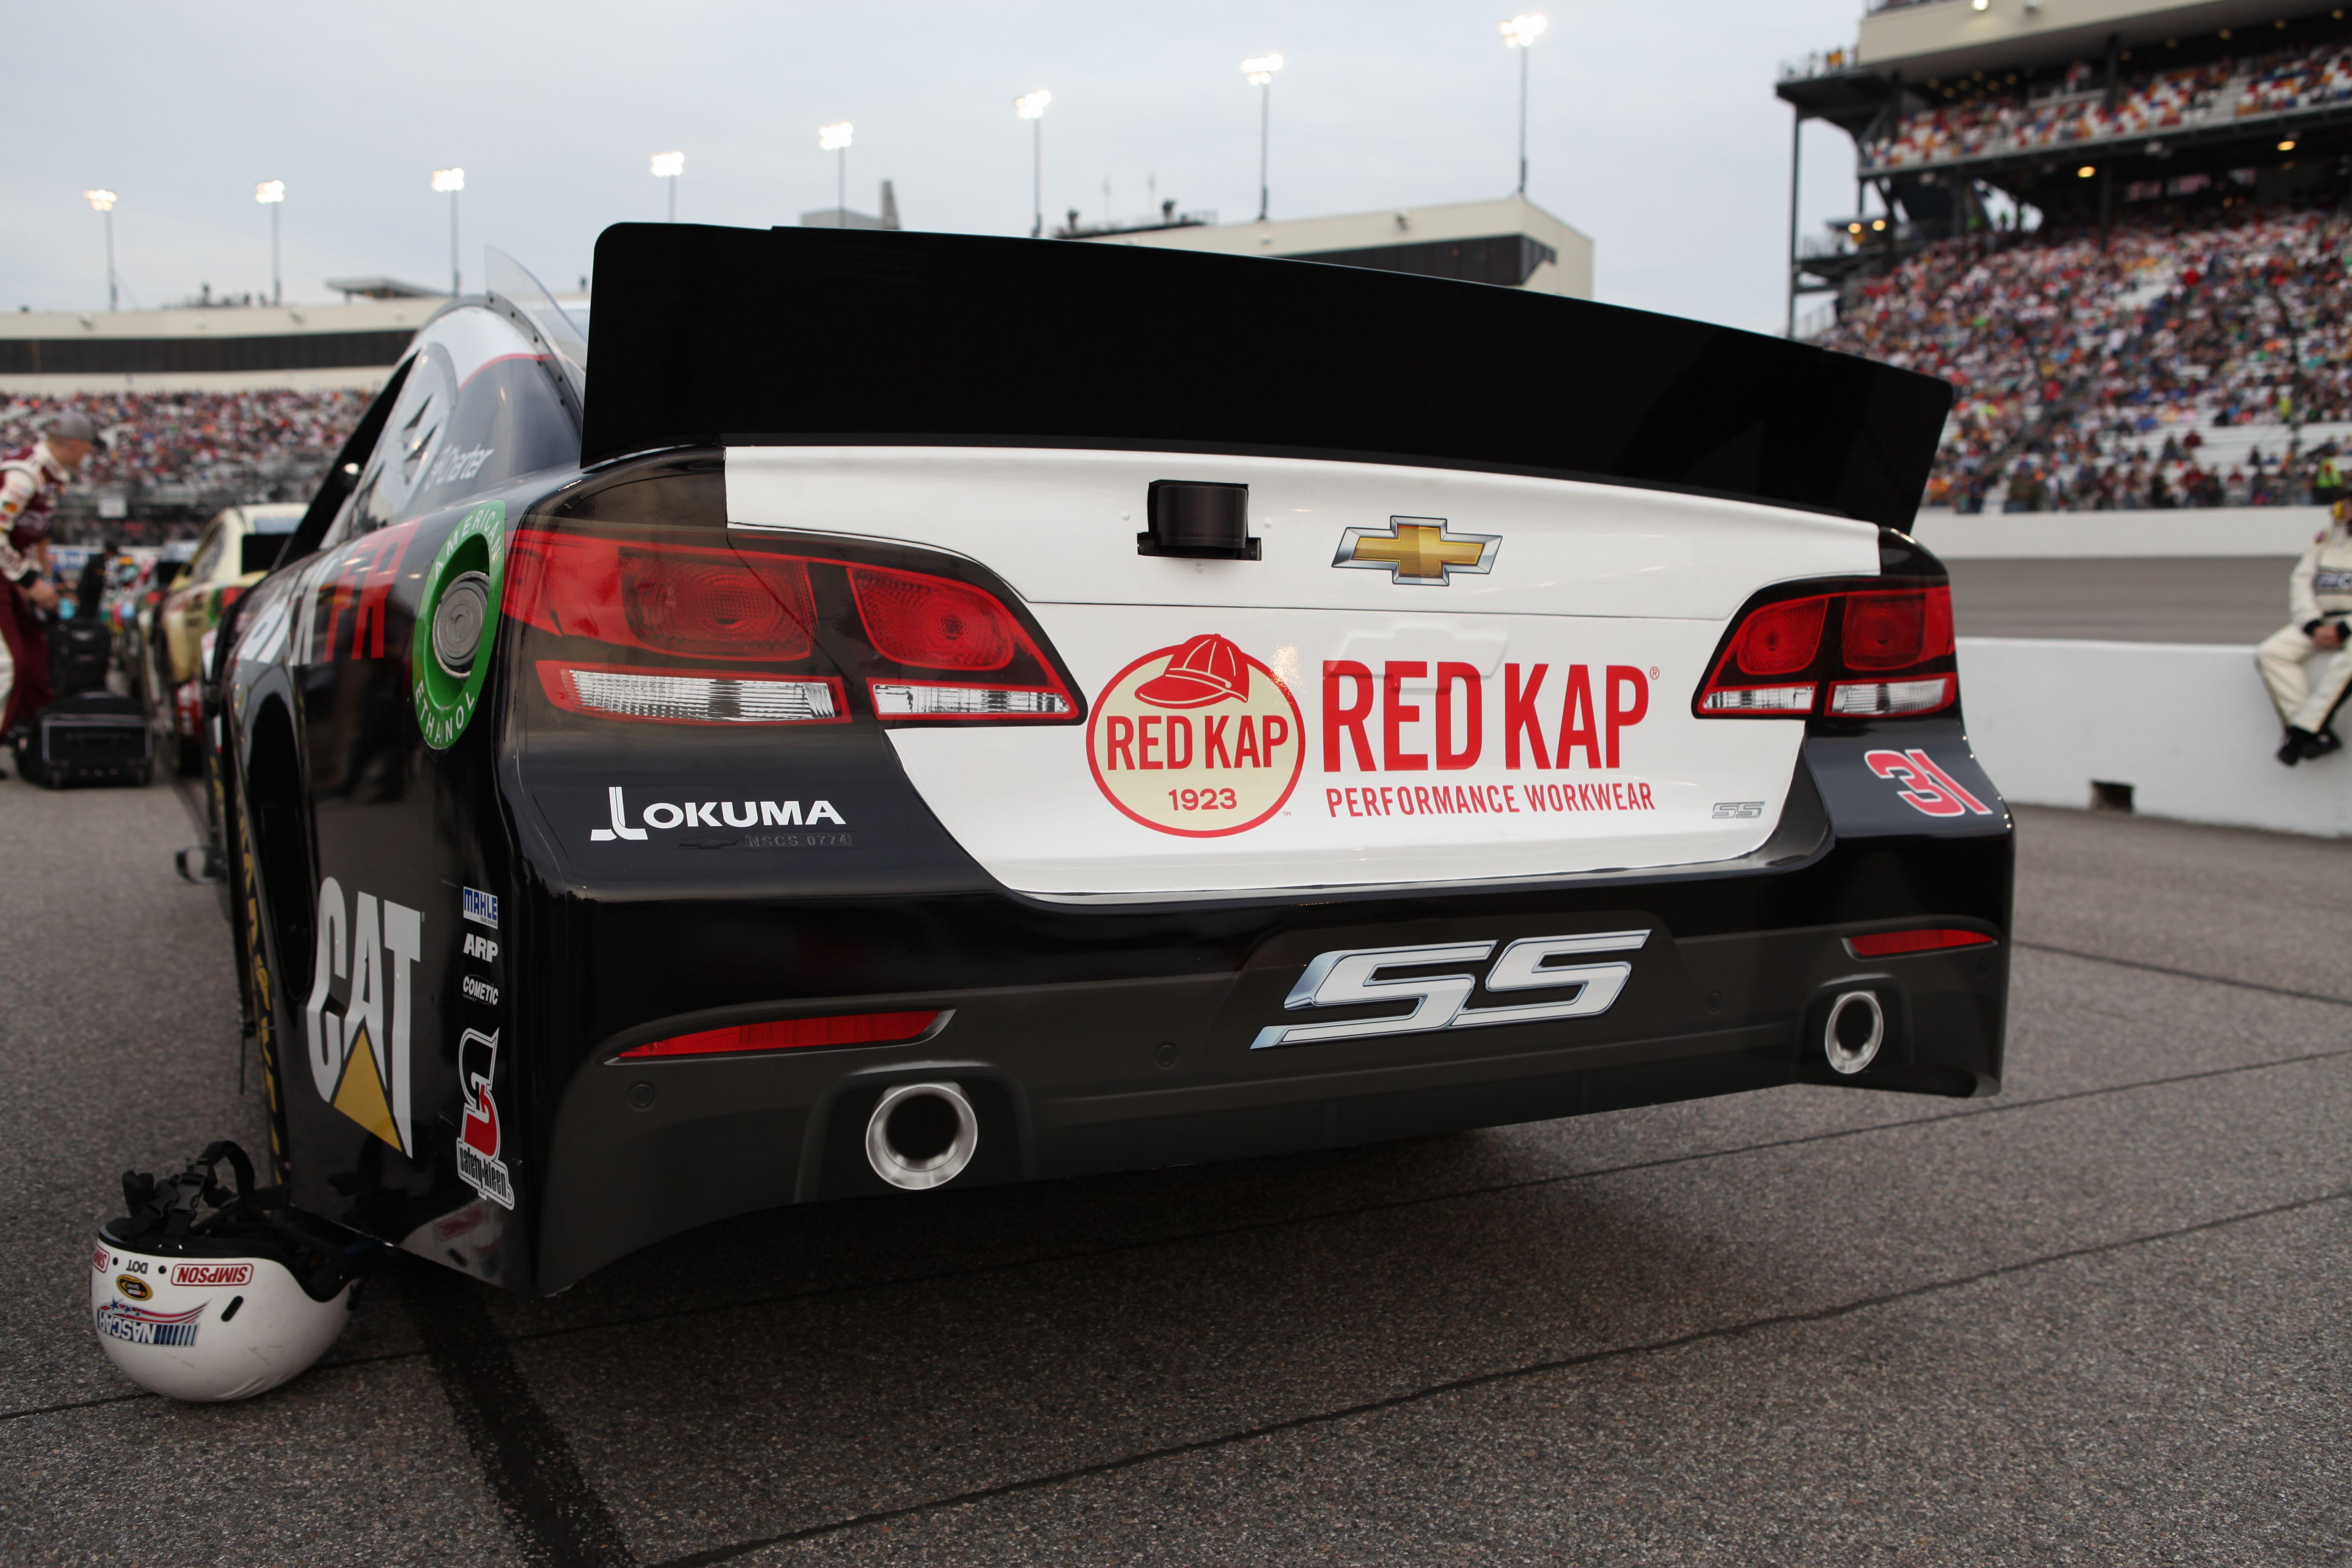 Red Kap Logo - Workwear Uniforms | Red Kap Done Right | News & Events | Our NASCAR ...